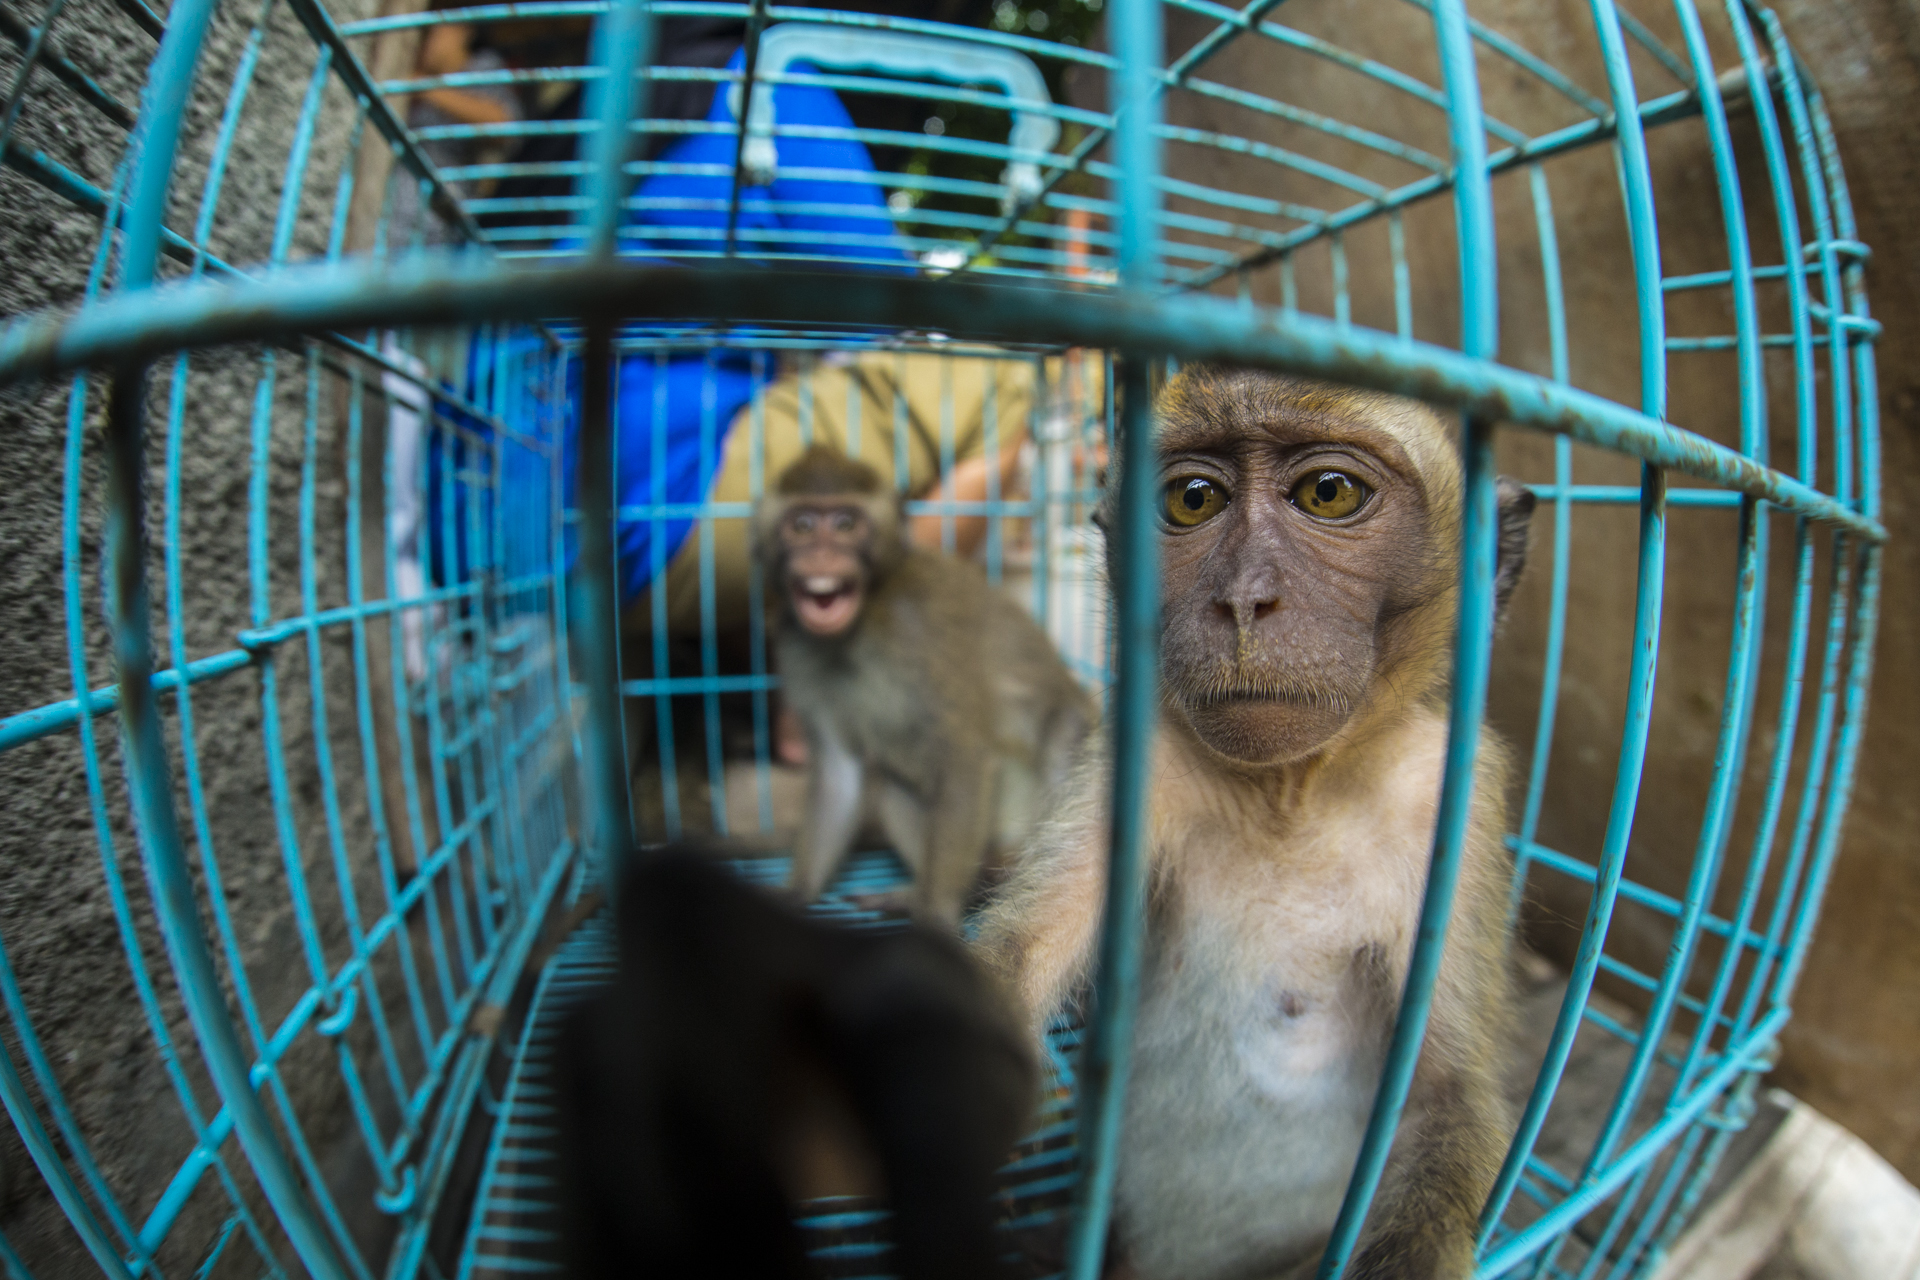  The only way to get a young monkey like this is to kill its mother. Long tailed macaques are sold in almost every animal market. 